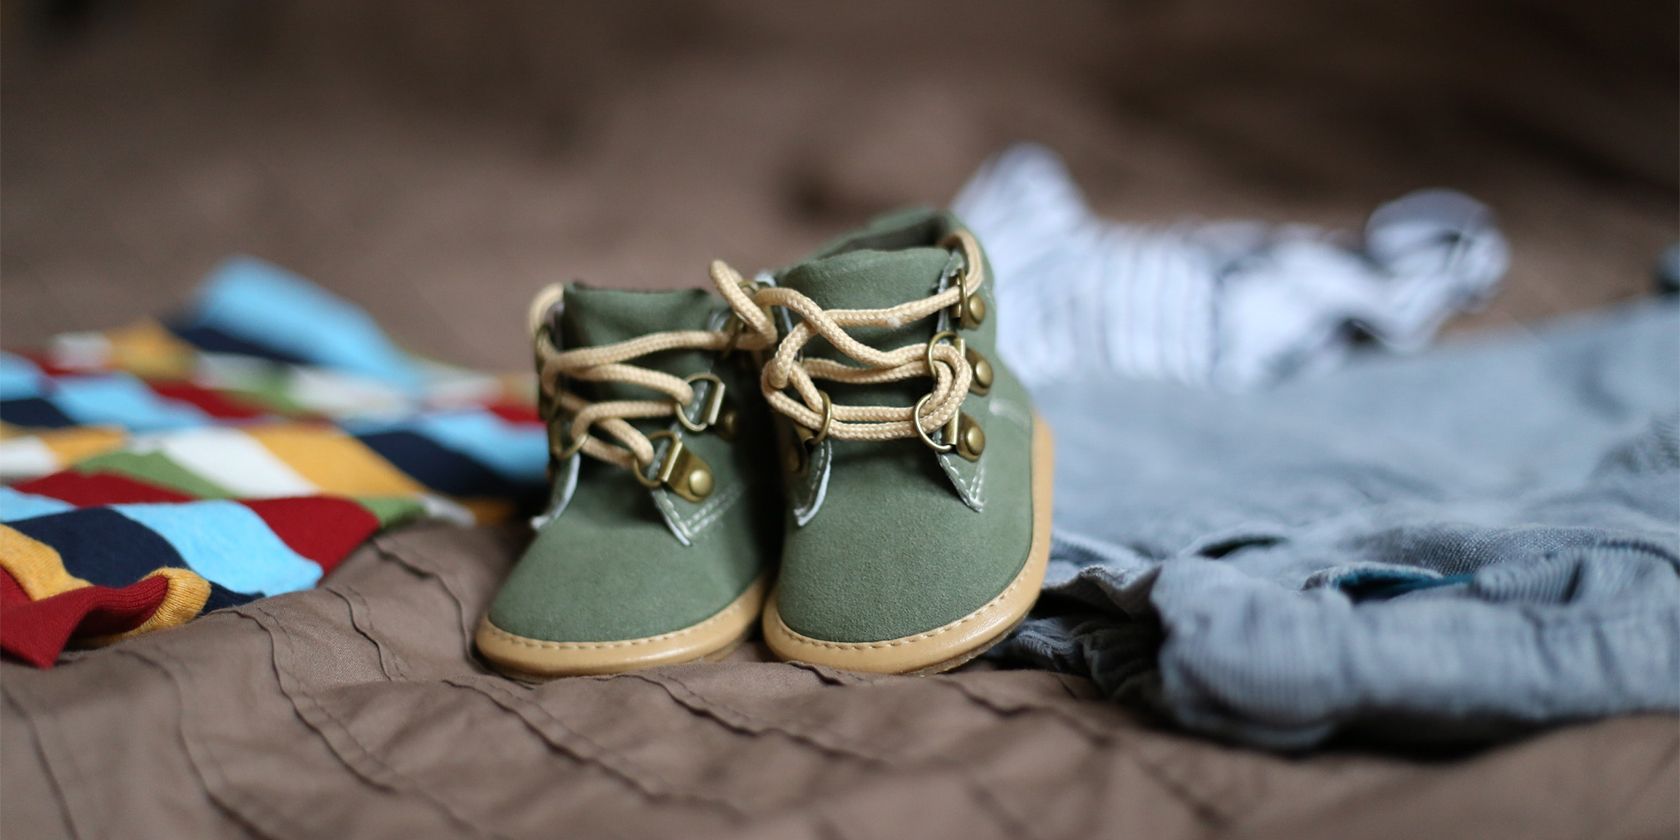 Baby shoes on top of baby clothes.